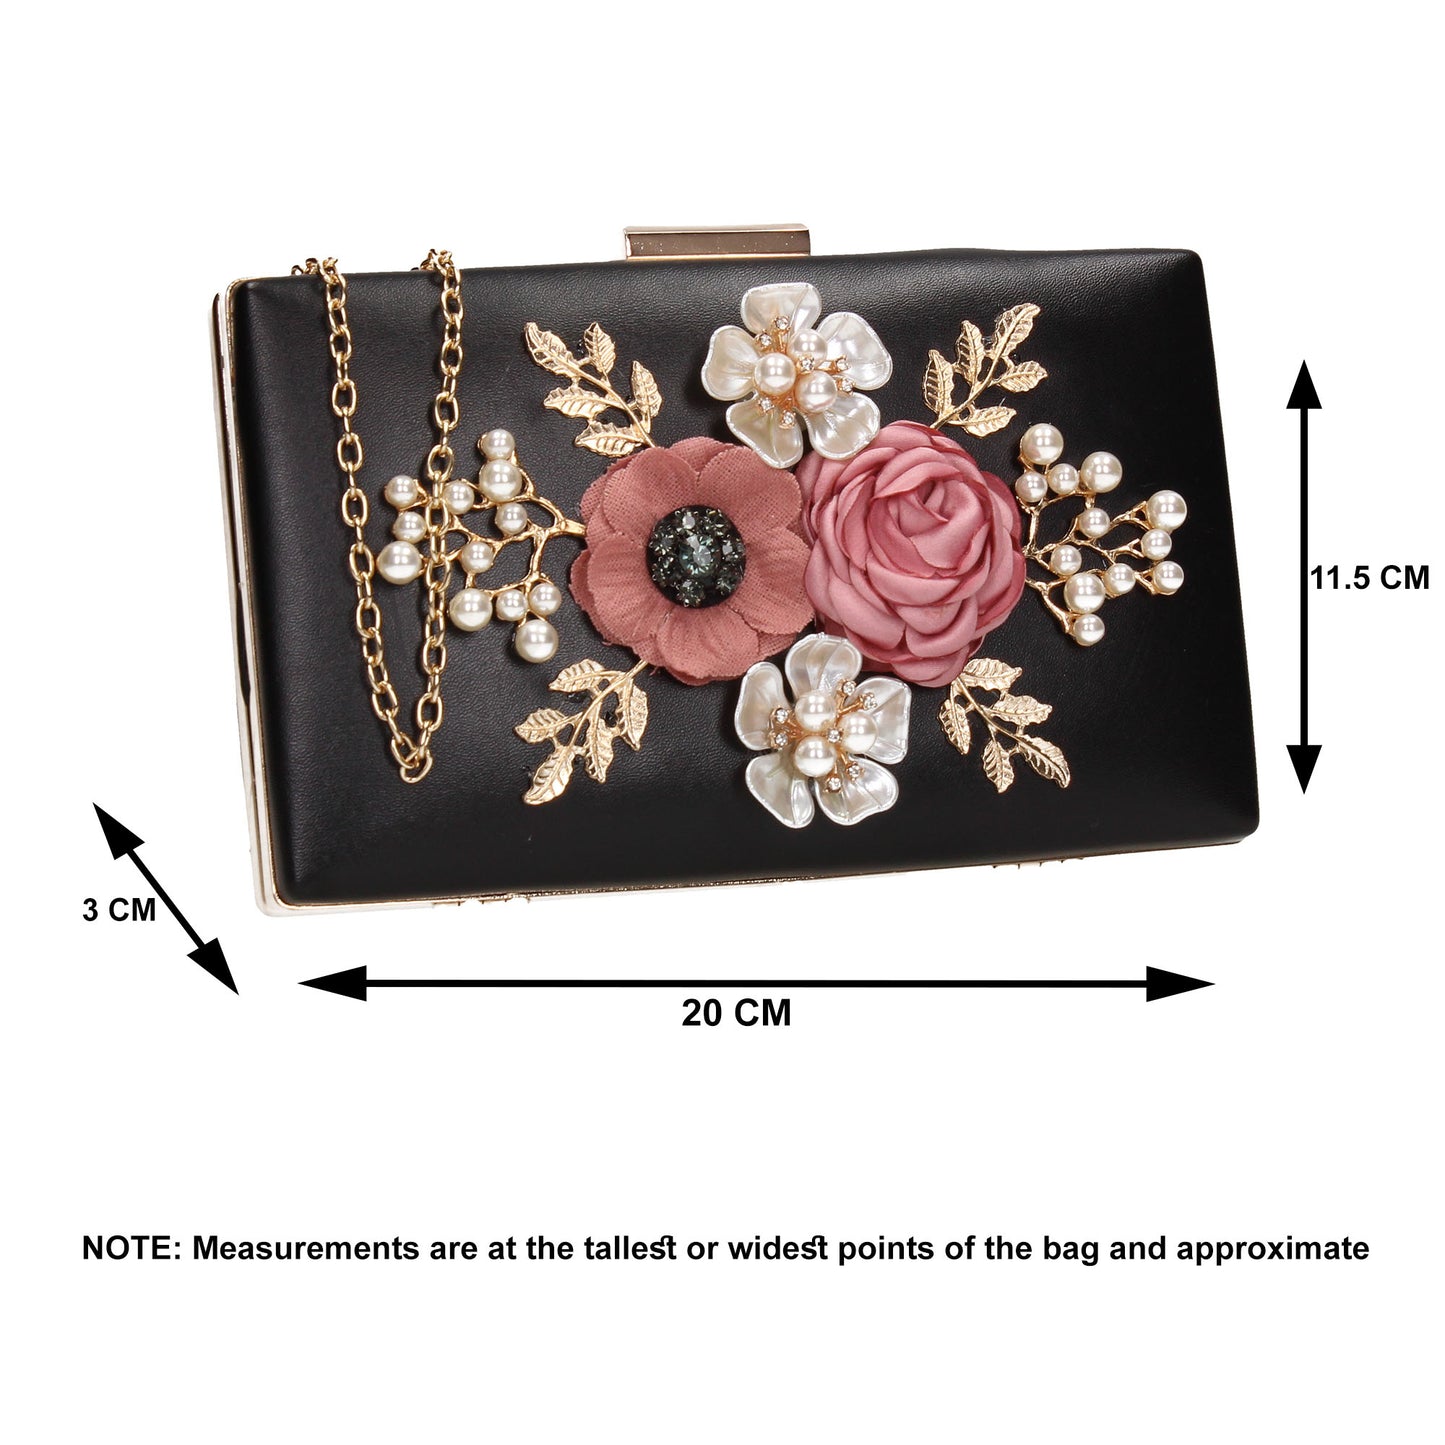 SWANKYSWANS Valery Floral Detail Clutch Bag Gold Cute Cheap Clutch Bag For Weddings School and Work